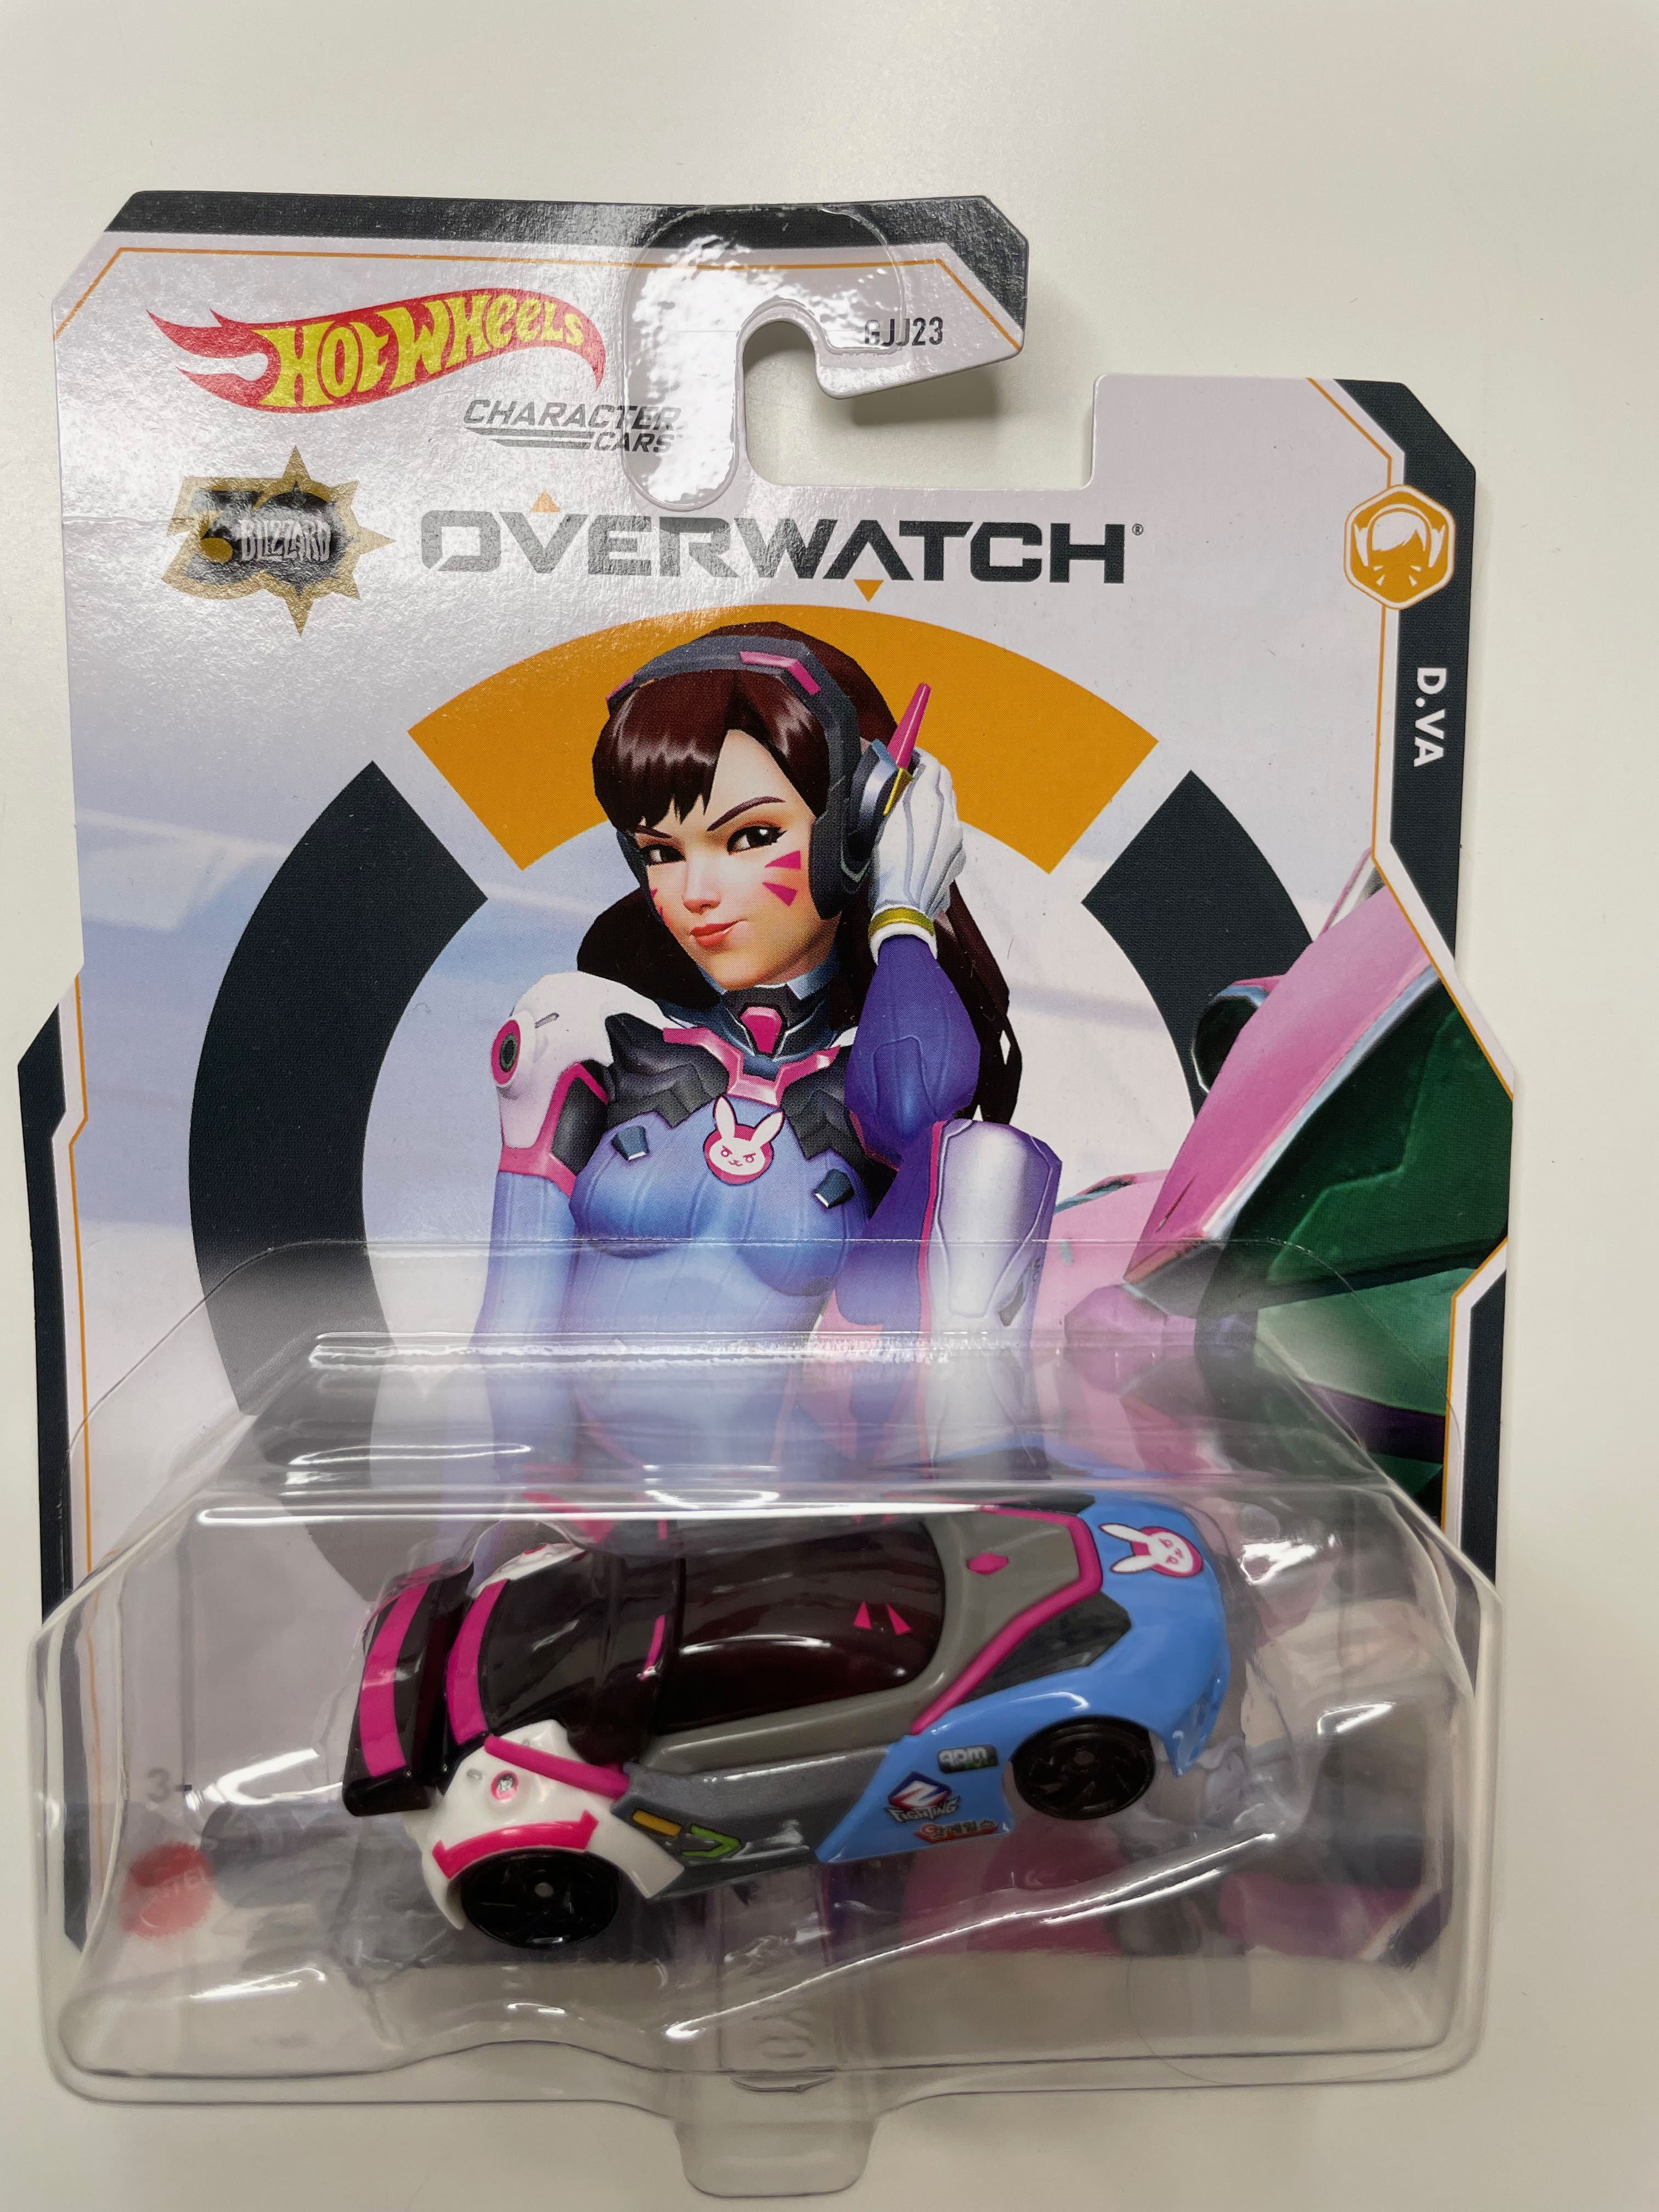 Hot Wheels Character Cars Overwatch Complete Set of 5 by Mattel Blizzard for sale online 